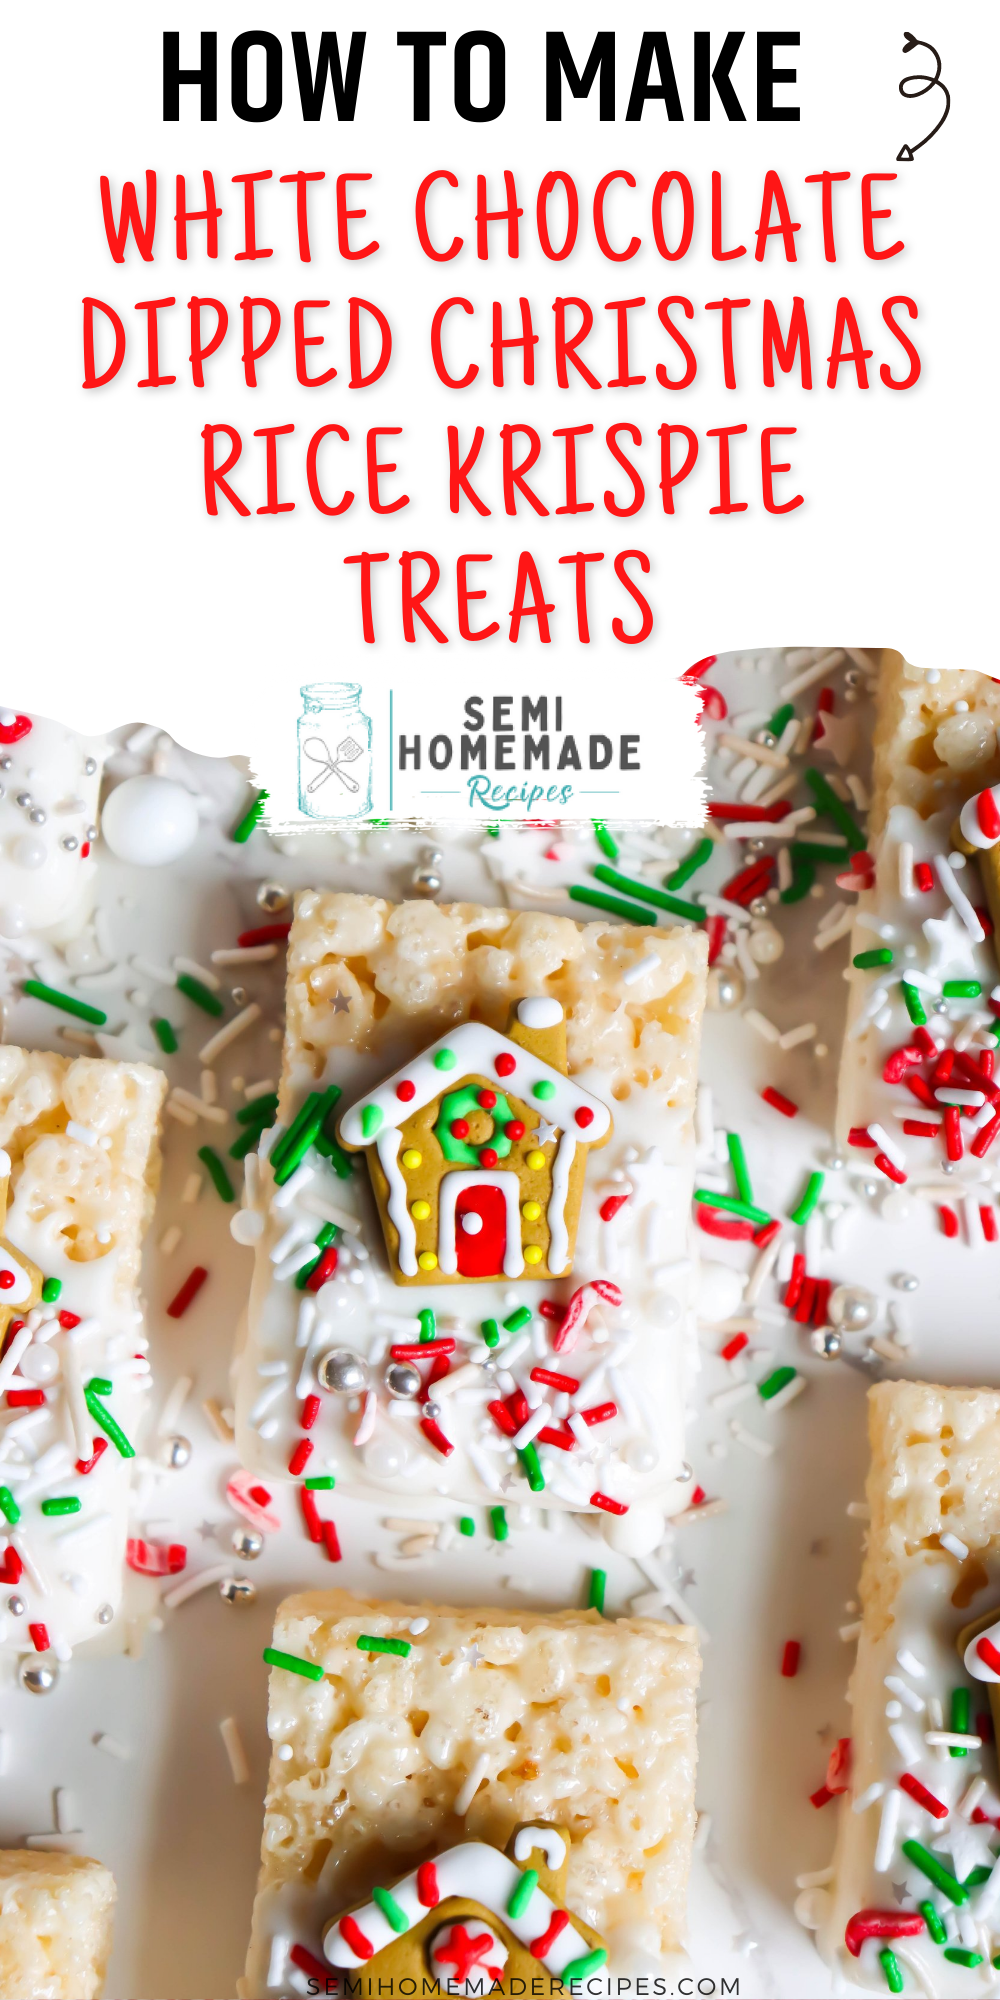 These easy White Chocolate Dipped Christmas Rice Krispie Treats are a simple semi homemade Christmas treat that everyone will love! They're easy to make and super cute! Perfect for a Christmas party or a dessert tray!

